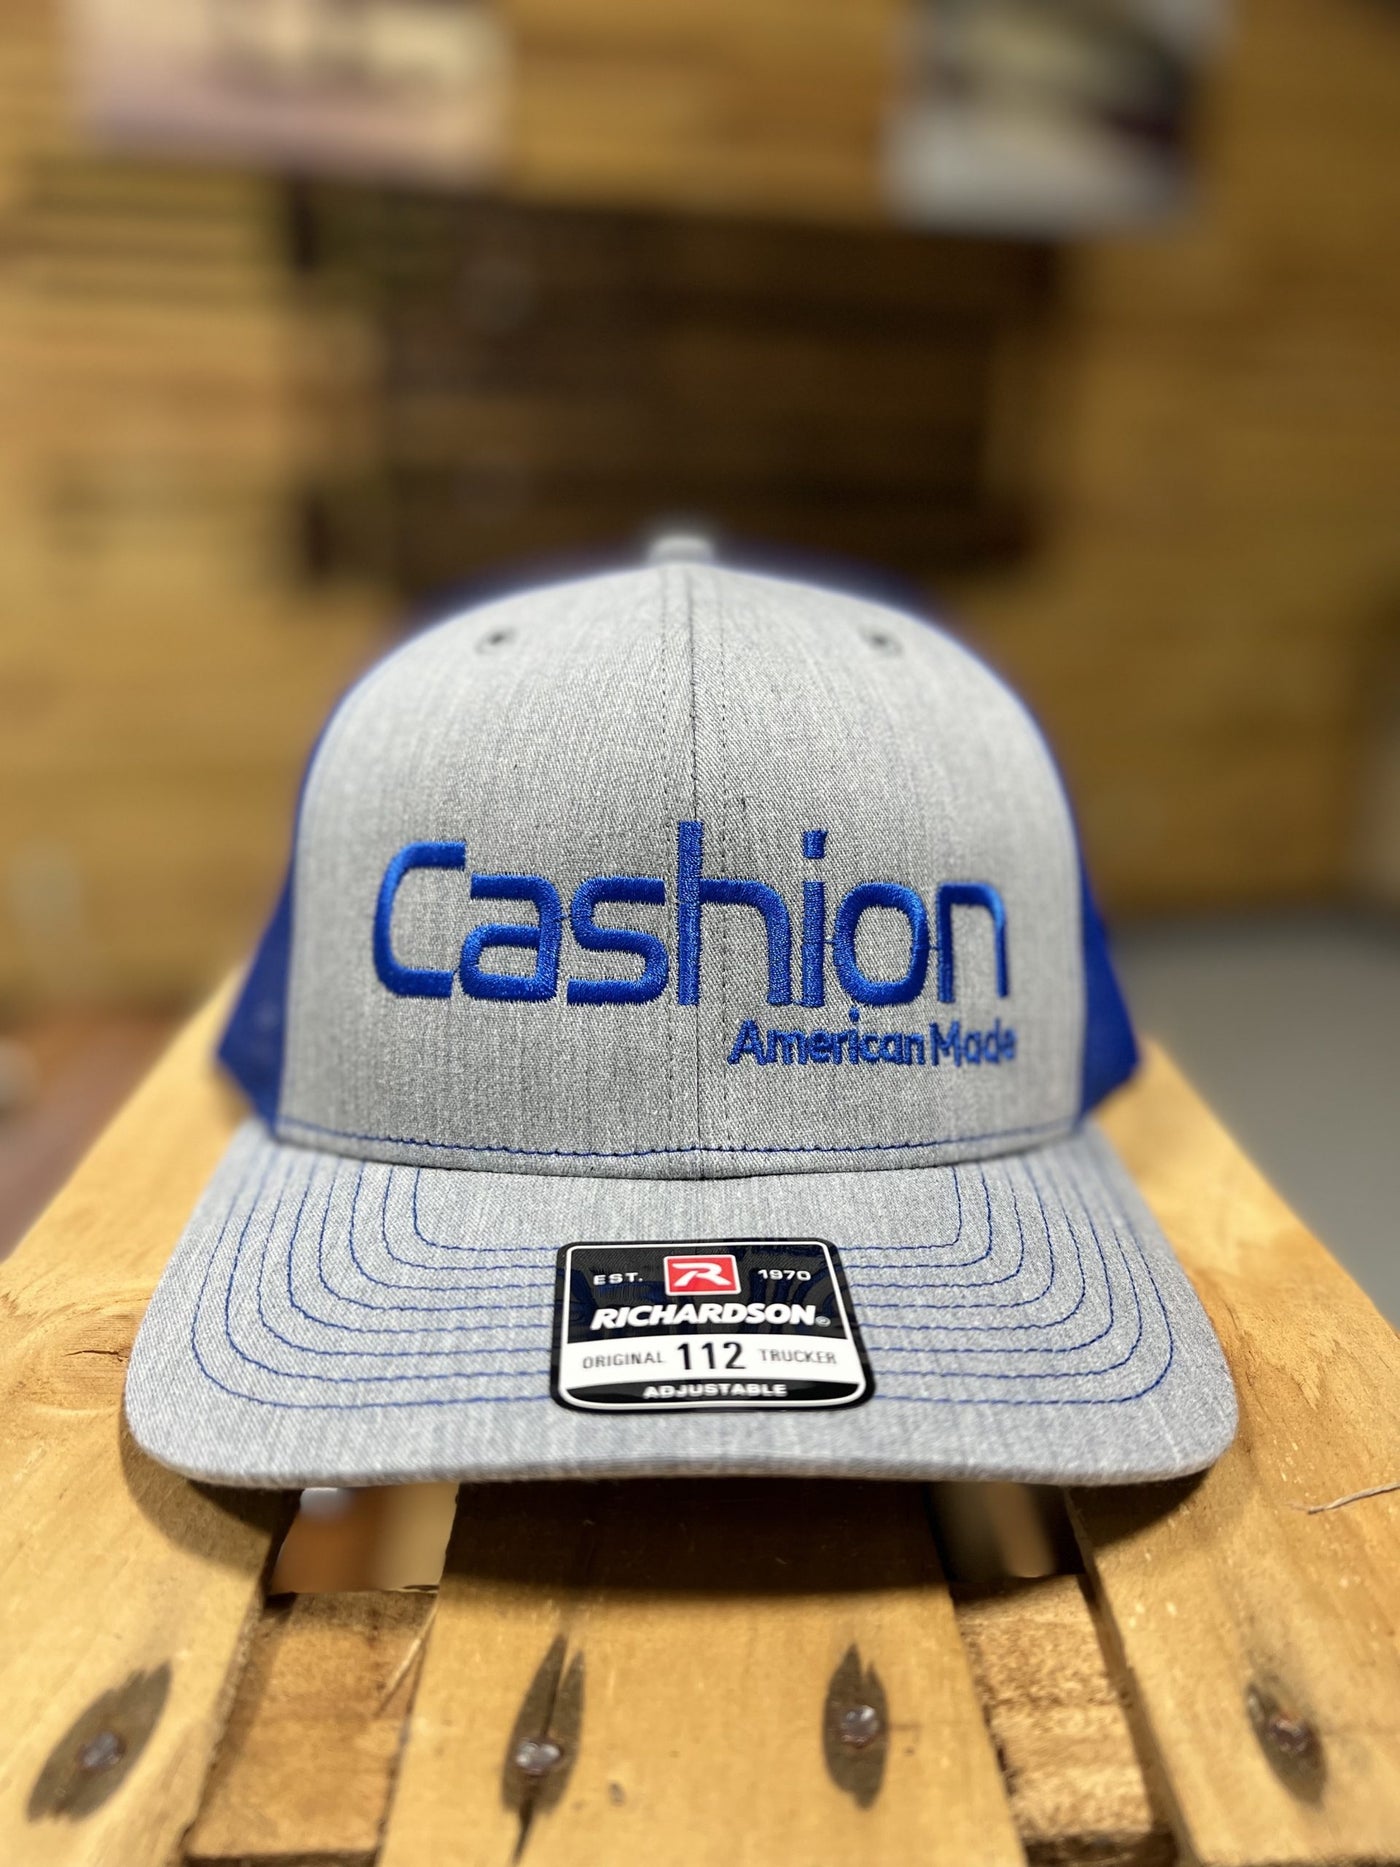 Cashion Embroidered Hat